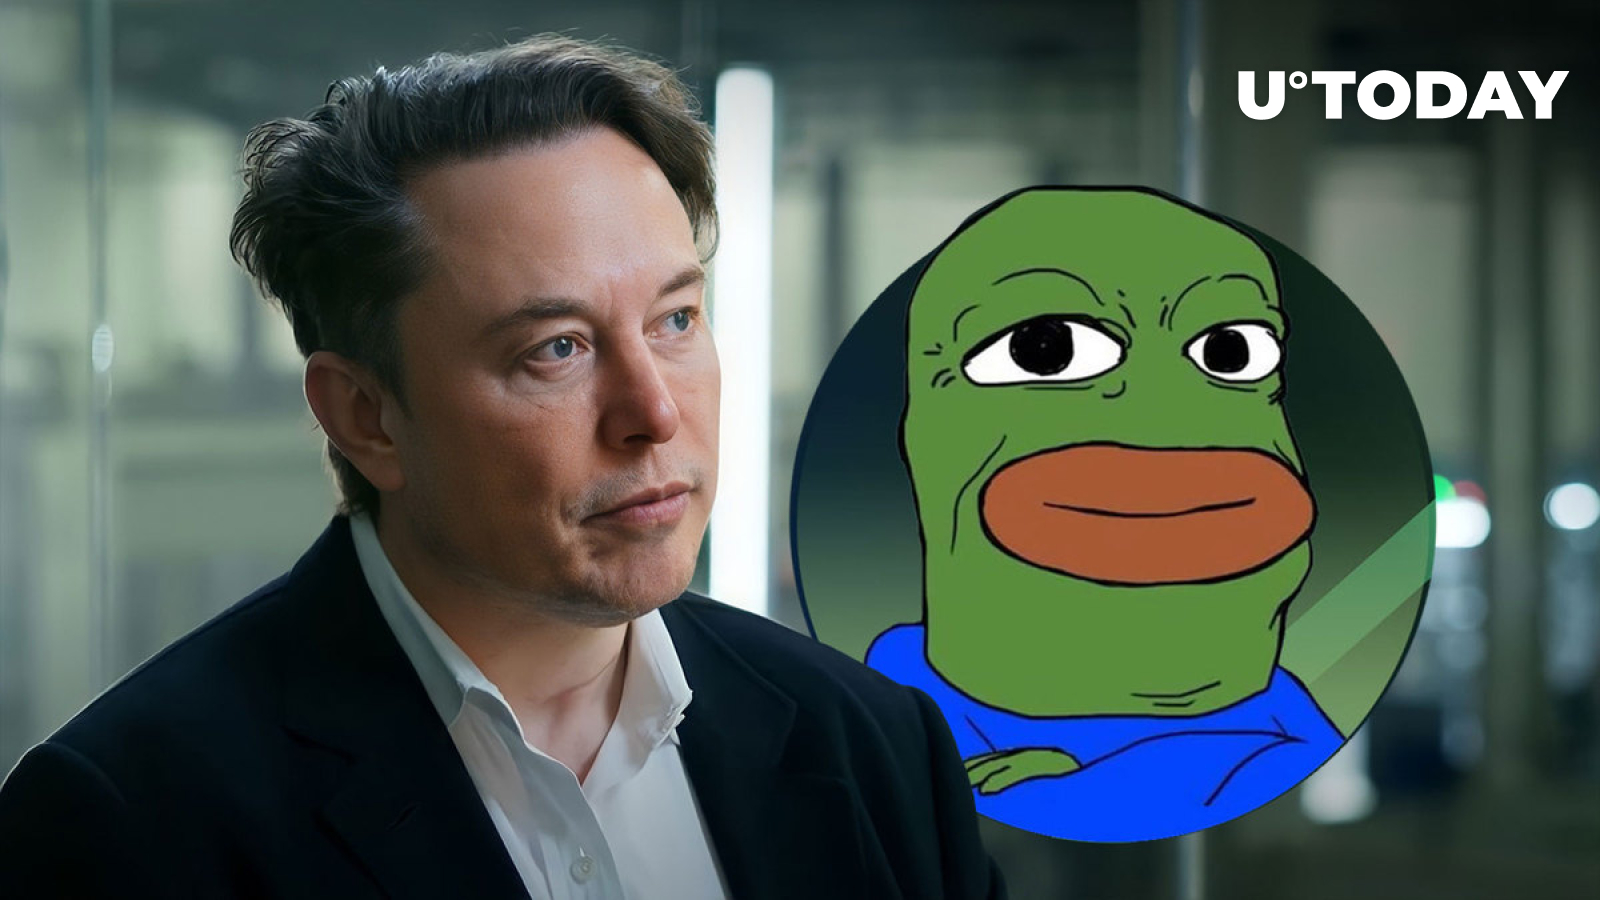 elon-musk-s-tweet-sends-bob-up-43-here-s-what-you-missed